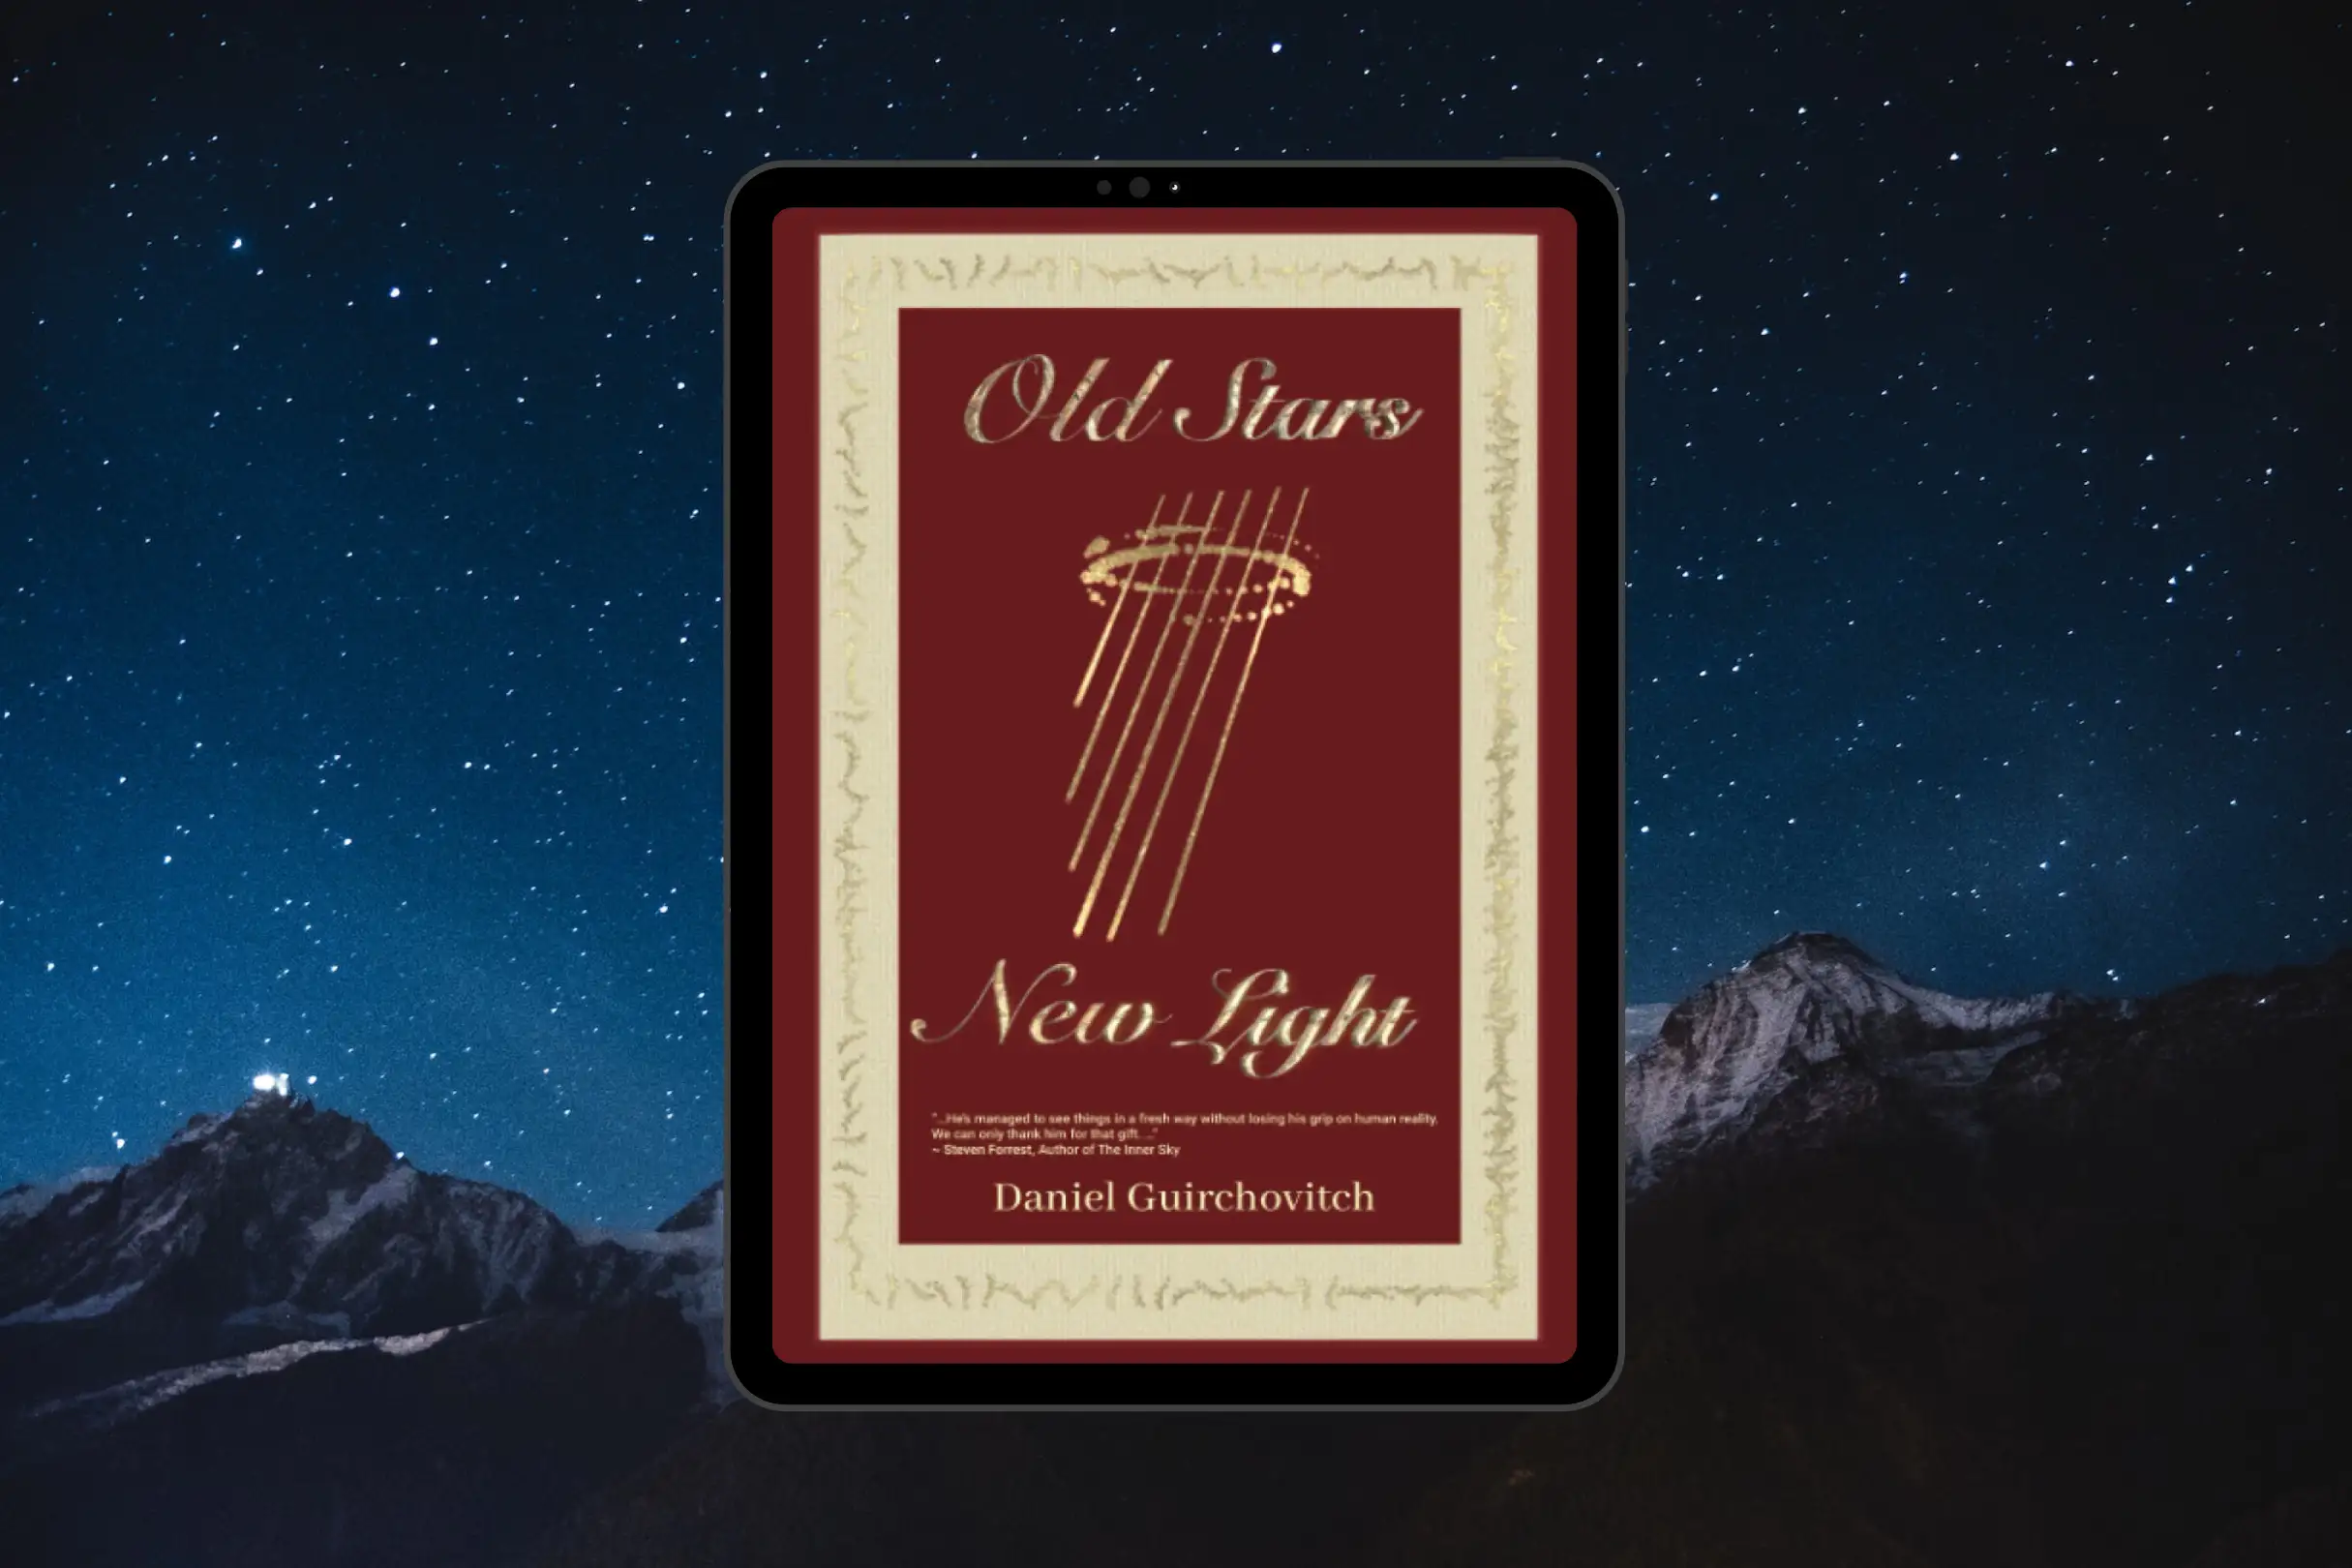 old_stars_new_light_book_review